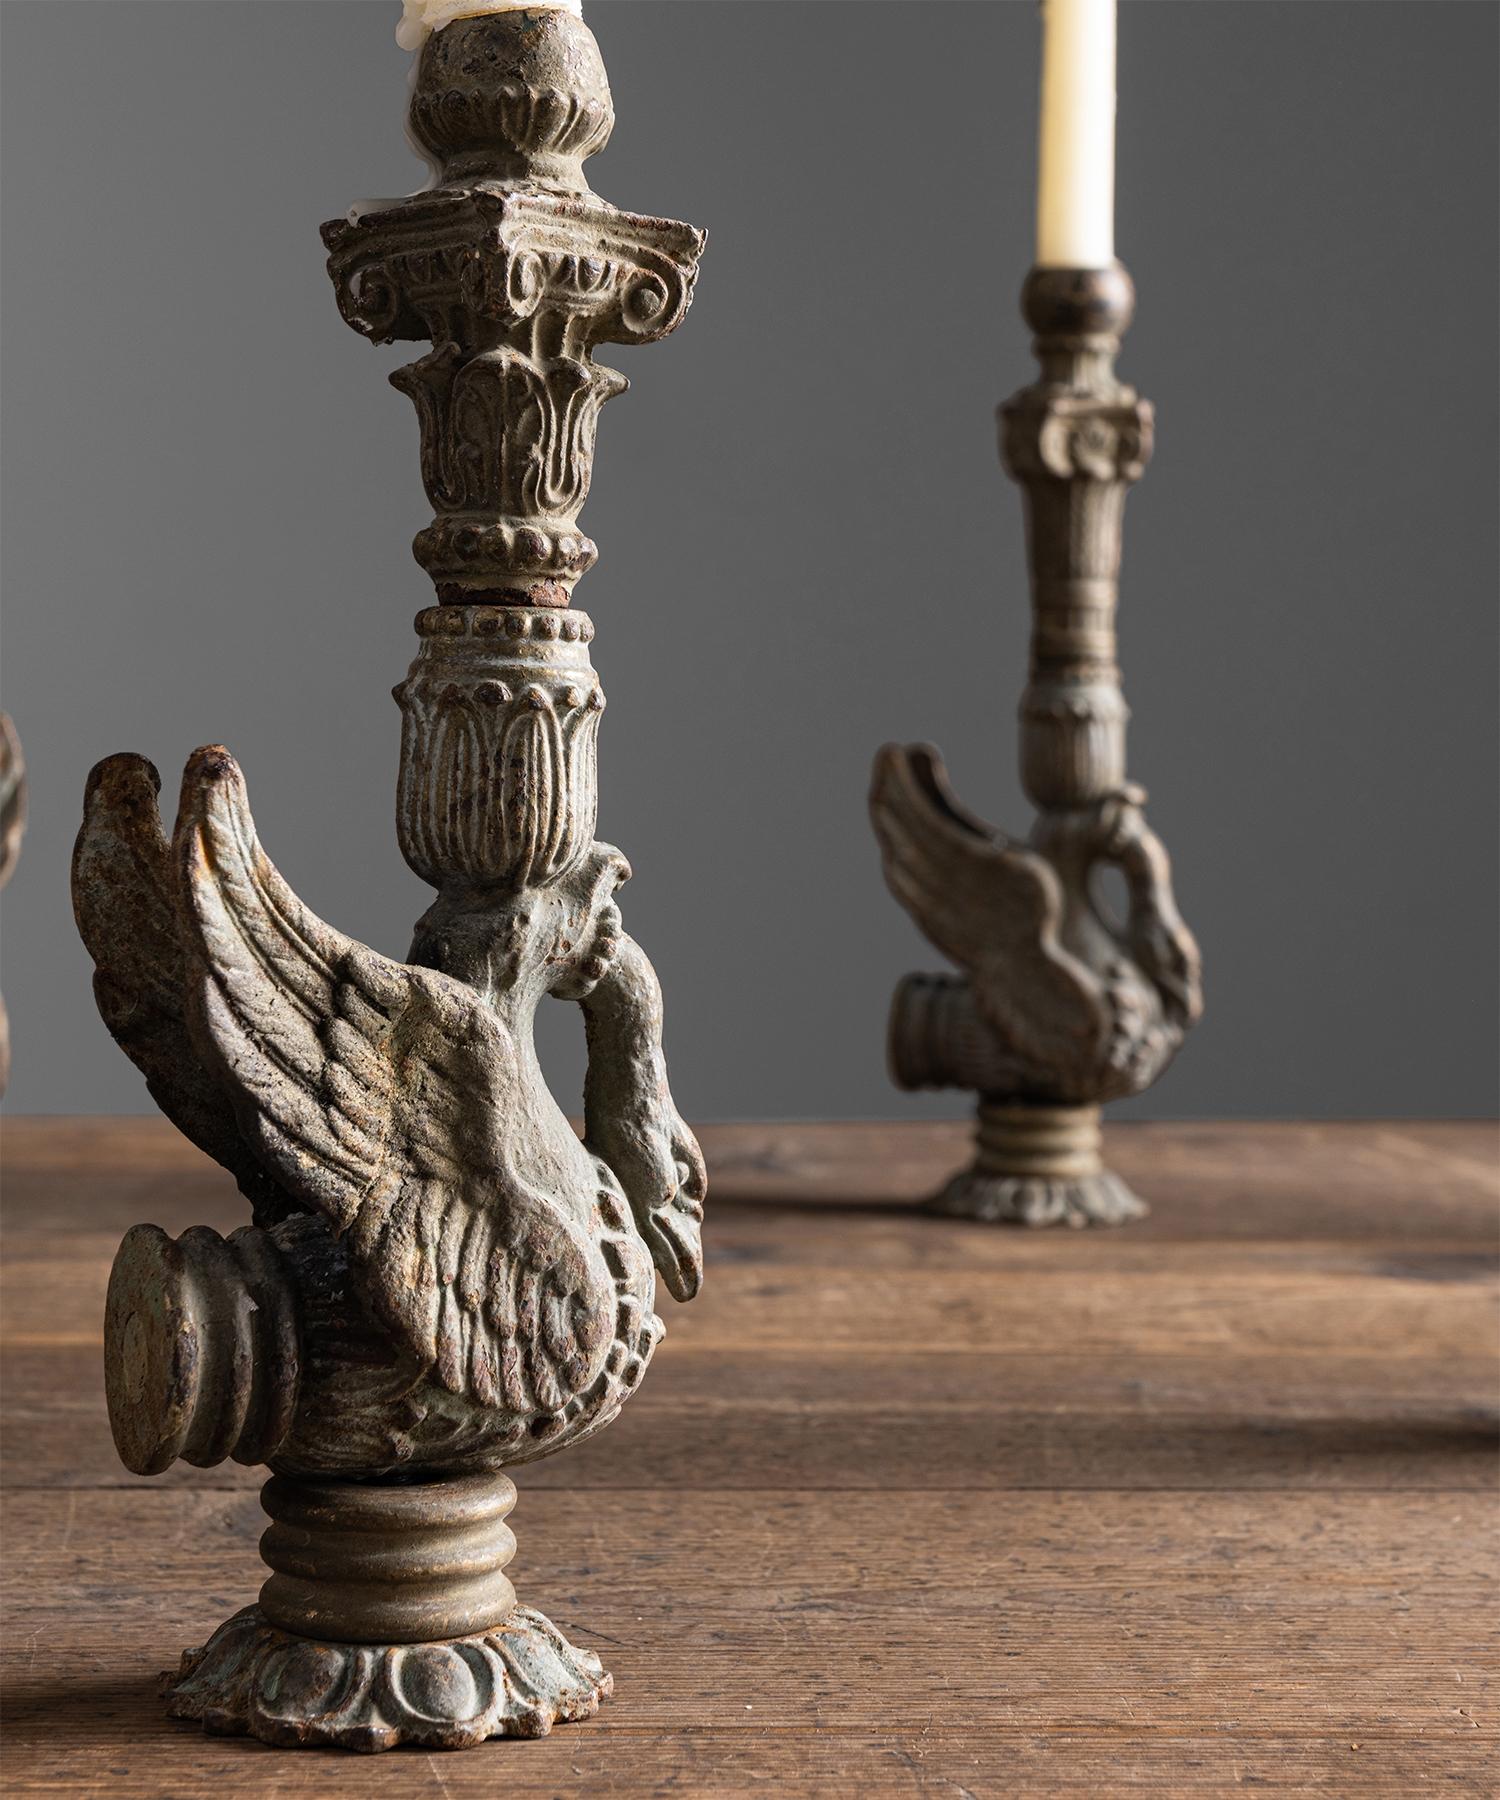 Cast iron swan candle holders
France circa 1830

Detailed carving with original painted surface.

Measures: 3” W x 4.25” D x 11.5” H

$ 720 each (6 available).

 